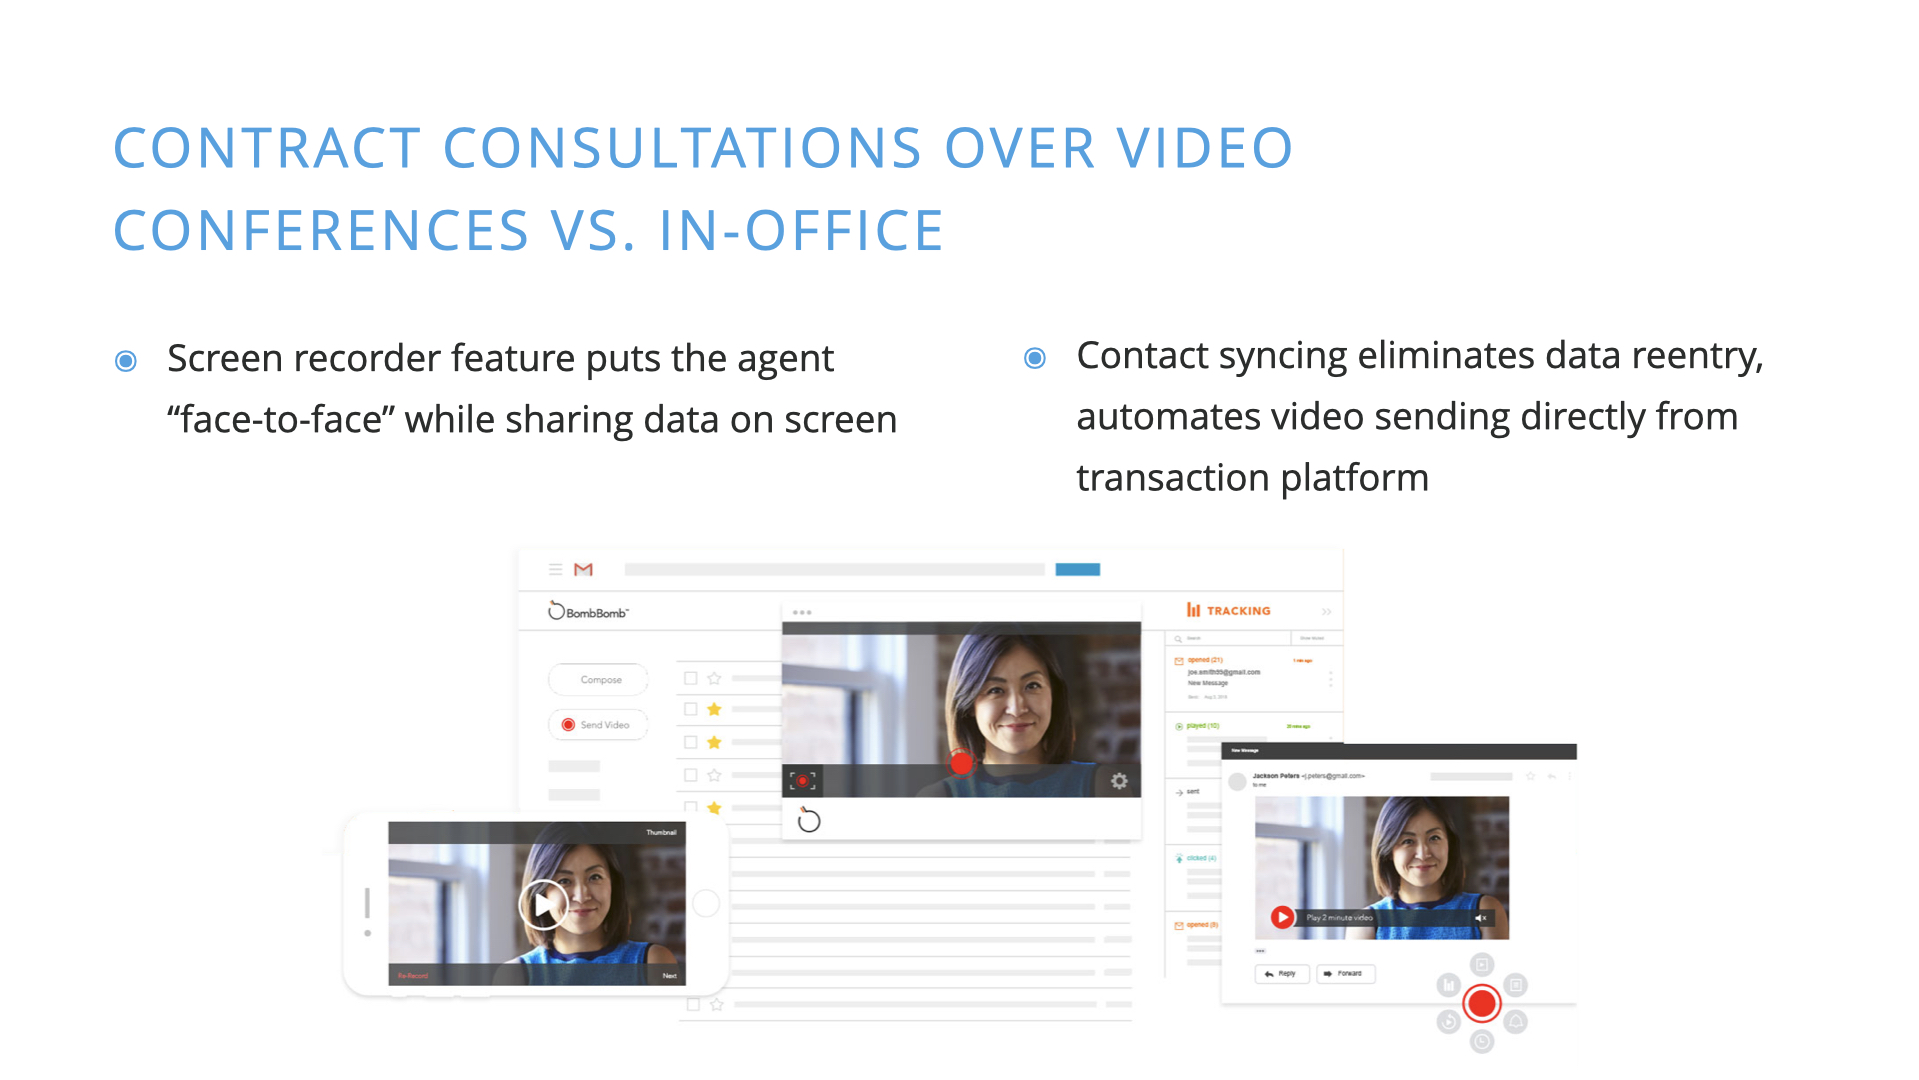 Agent shift to video conferences for contract consultations